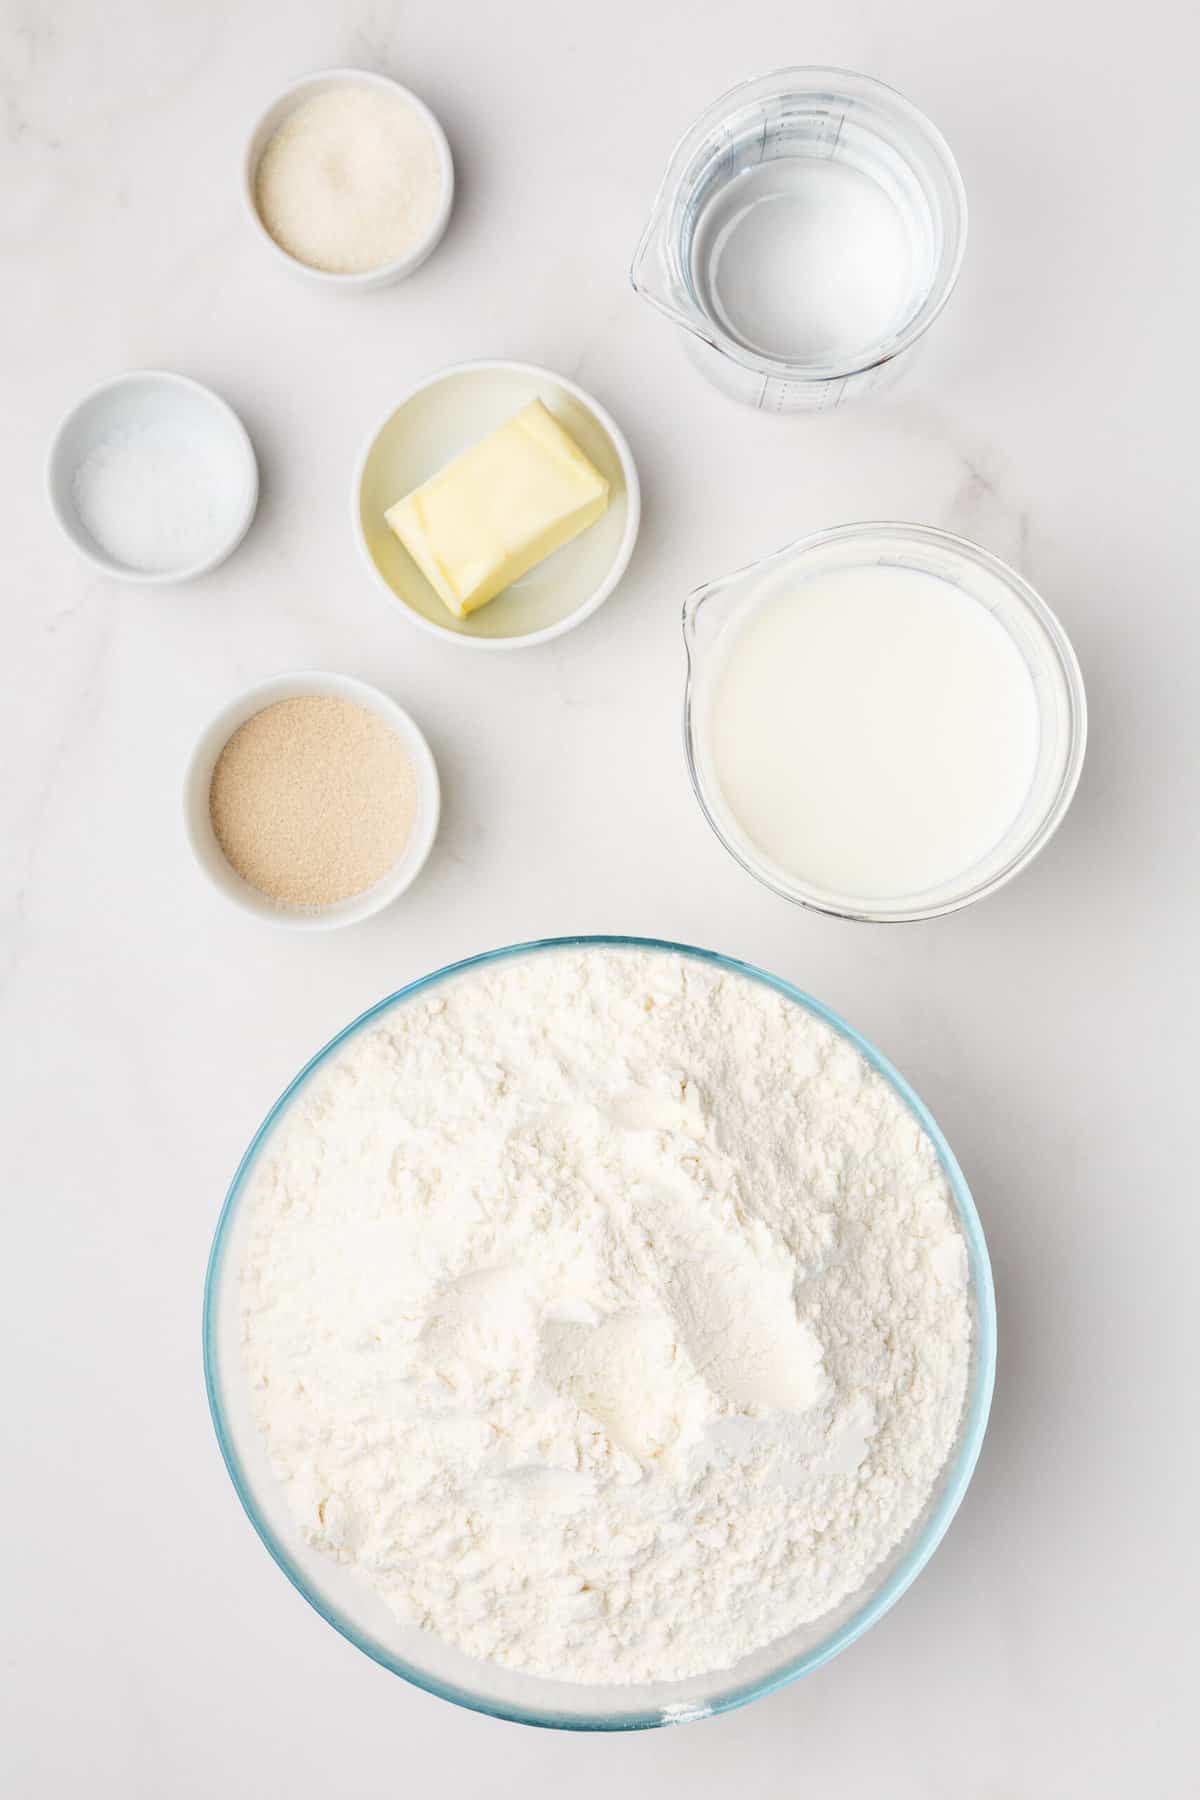 ingredients to make homemade white sandwich bread.